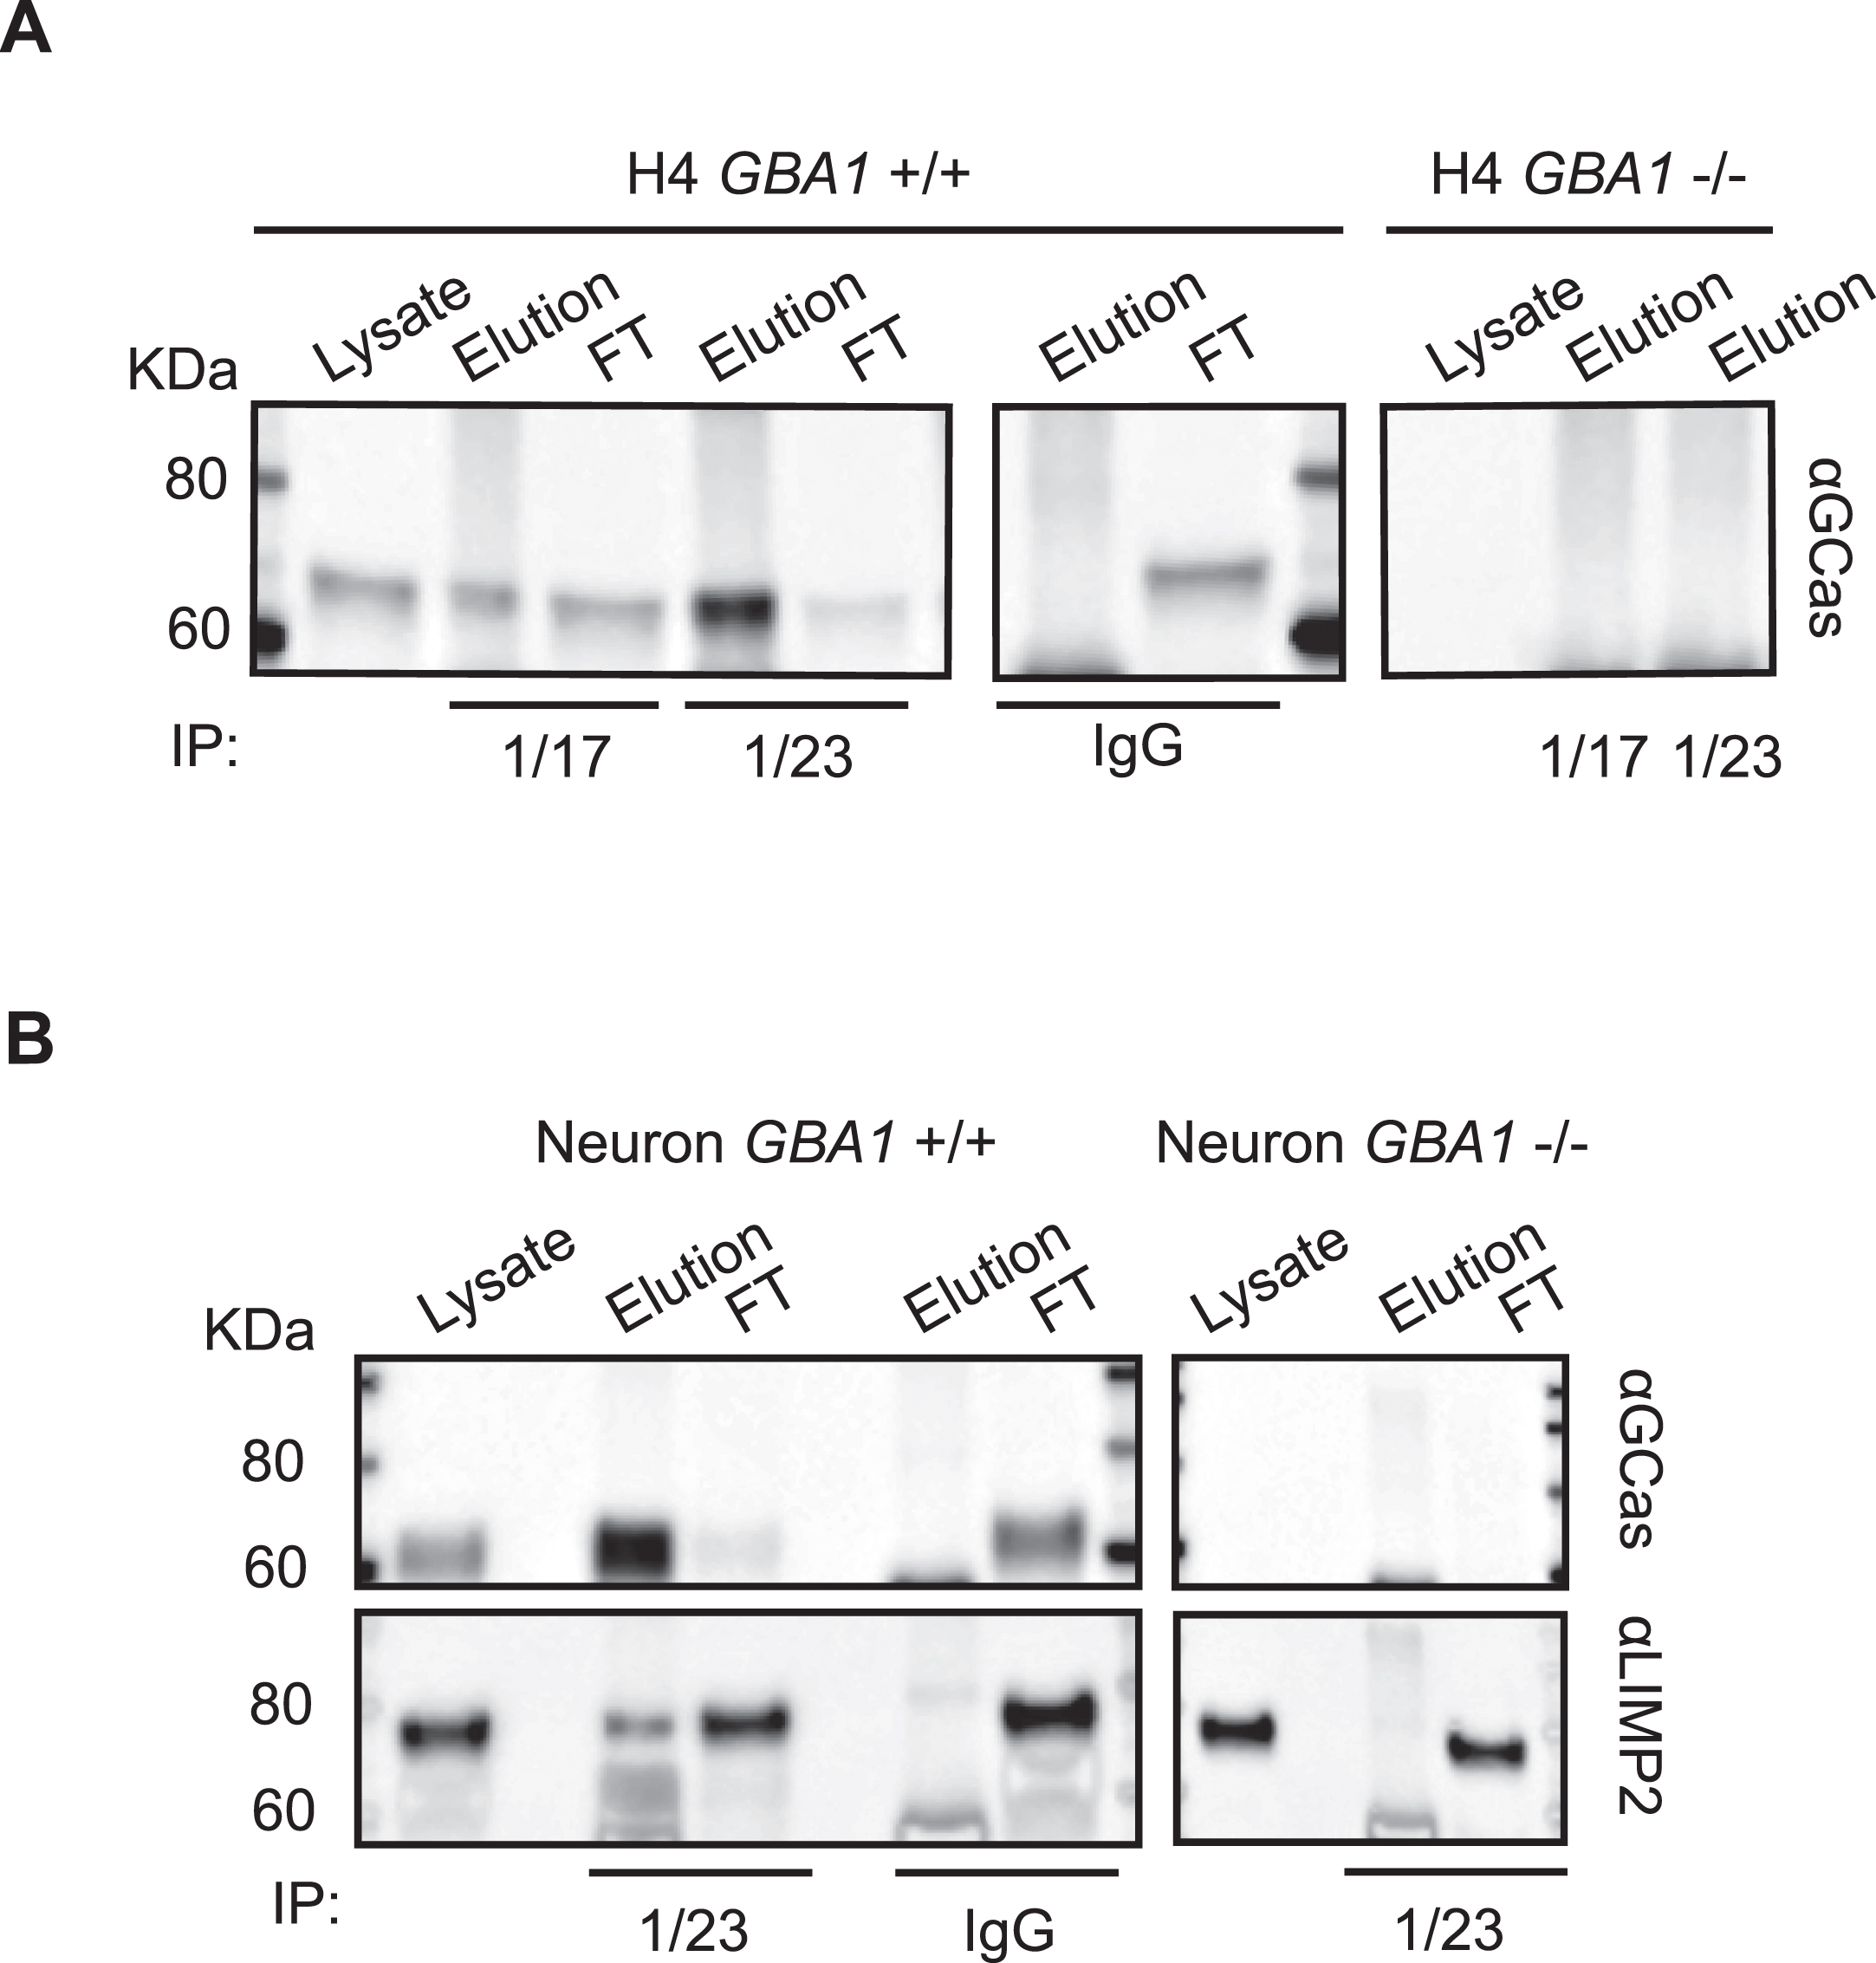 Application of hGCase-1/17 and hGCase-1/23 in immunoprecipitation. A) HGCase in H4 cell lysates was immunocaptured with hGCase-1/17 or hGCase-1/23 and immunoblotted with hGCase antibody EPR5143 after elution. B) Co-immunoprecipitation of LIMP2 with hGCase by hGCase-1/23. hGCase in neuron lysates was immunocaptured with hGCase-1/23, and the presence of LIMP2 in GCase co-precipitates was detected with a LIMP2 antibody.